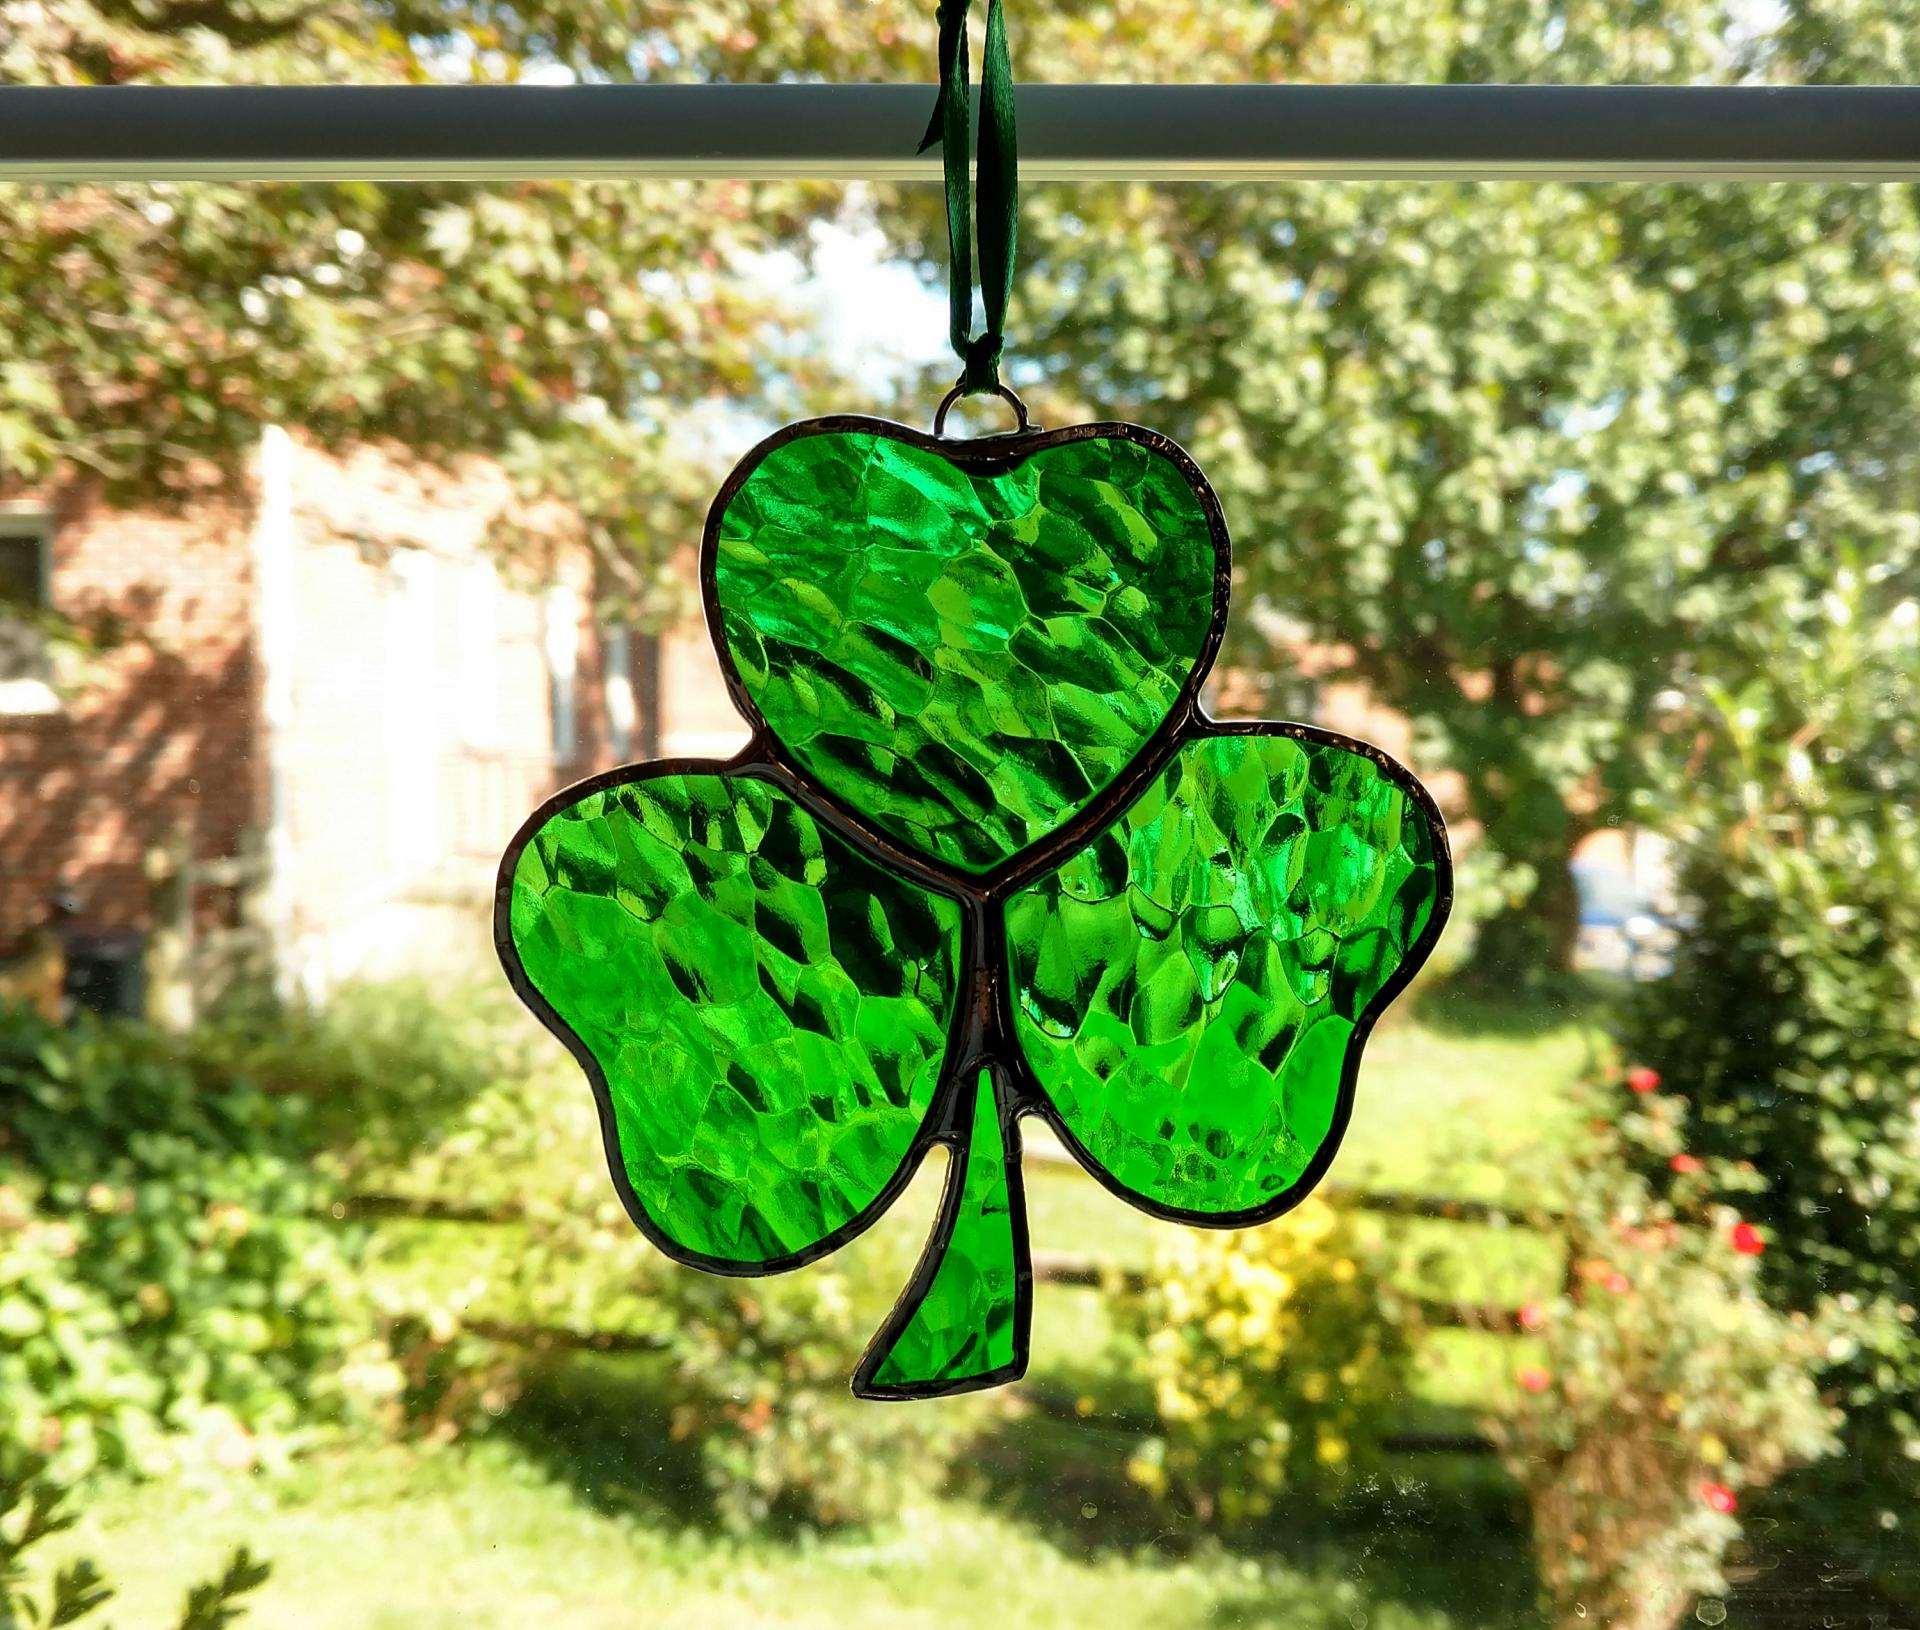 Stained glass shamrock suncatcher made with green hammered cathedral glass. Measures approximately four inches in diameter and comes with a suction cup hanger and ribbon.